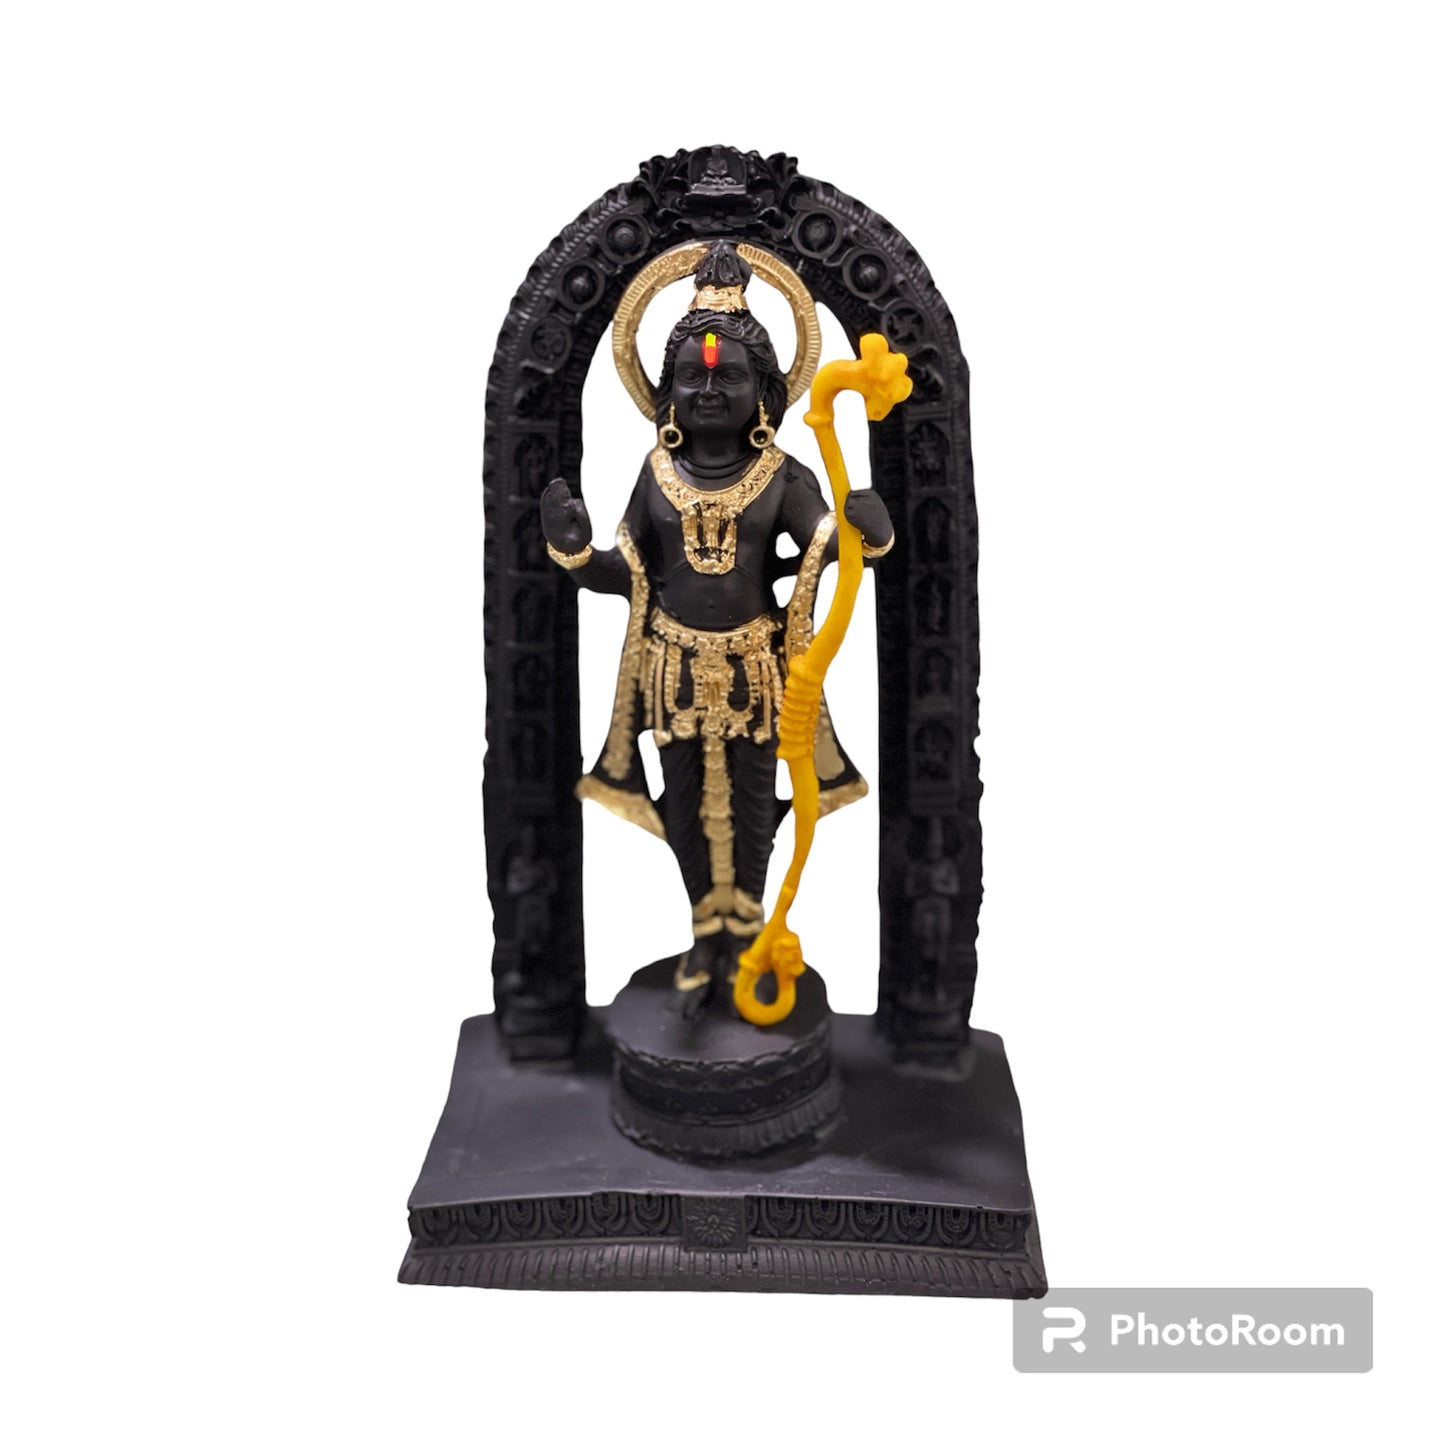 Statue Of Lord Ram ,For Home, Office| For Gifting on Special Occasions Like Anniversary, engagement, Marriage